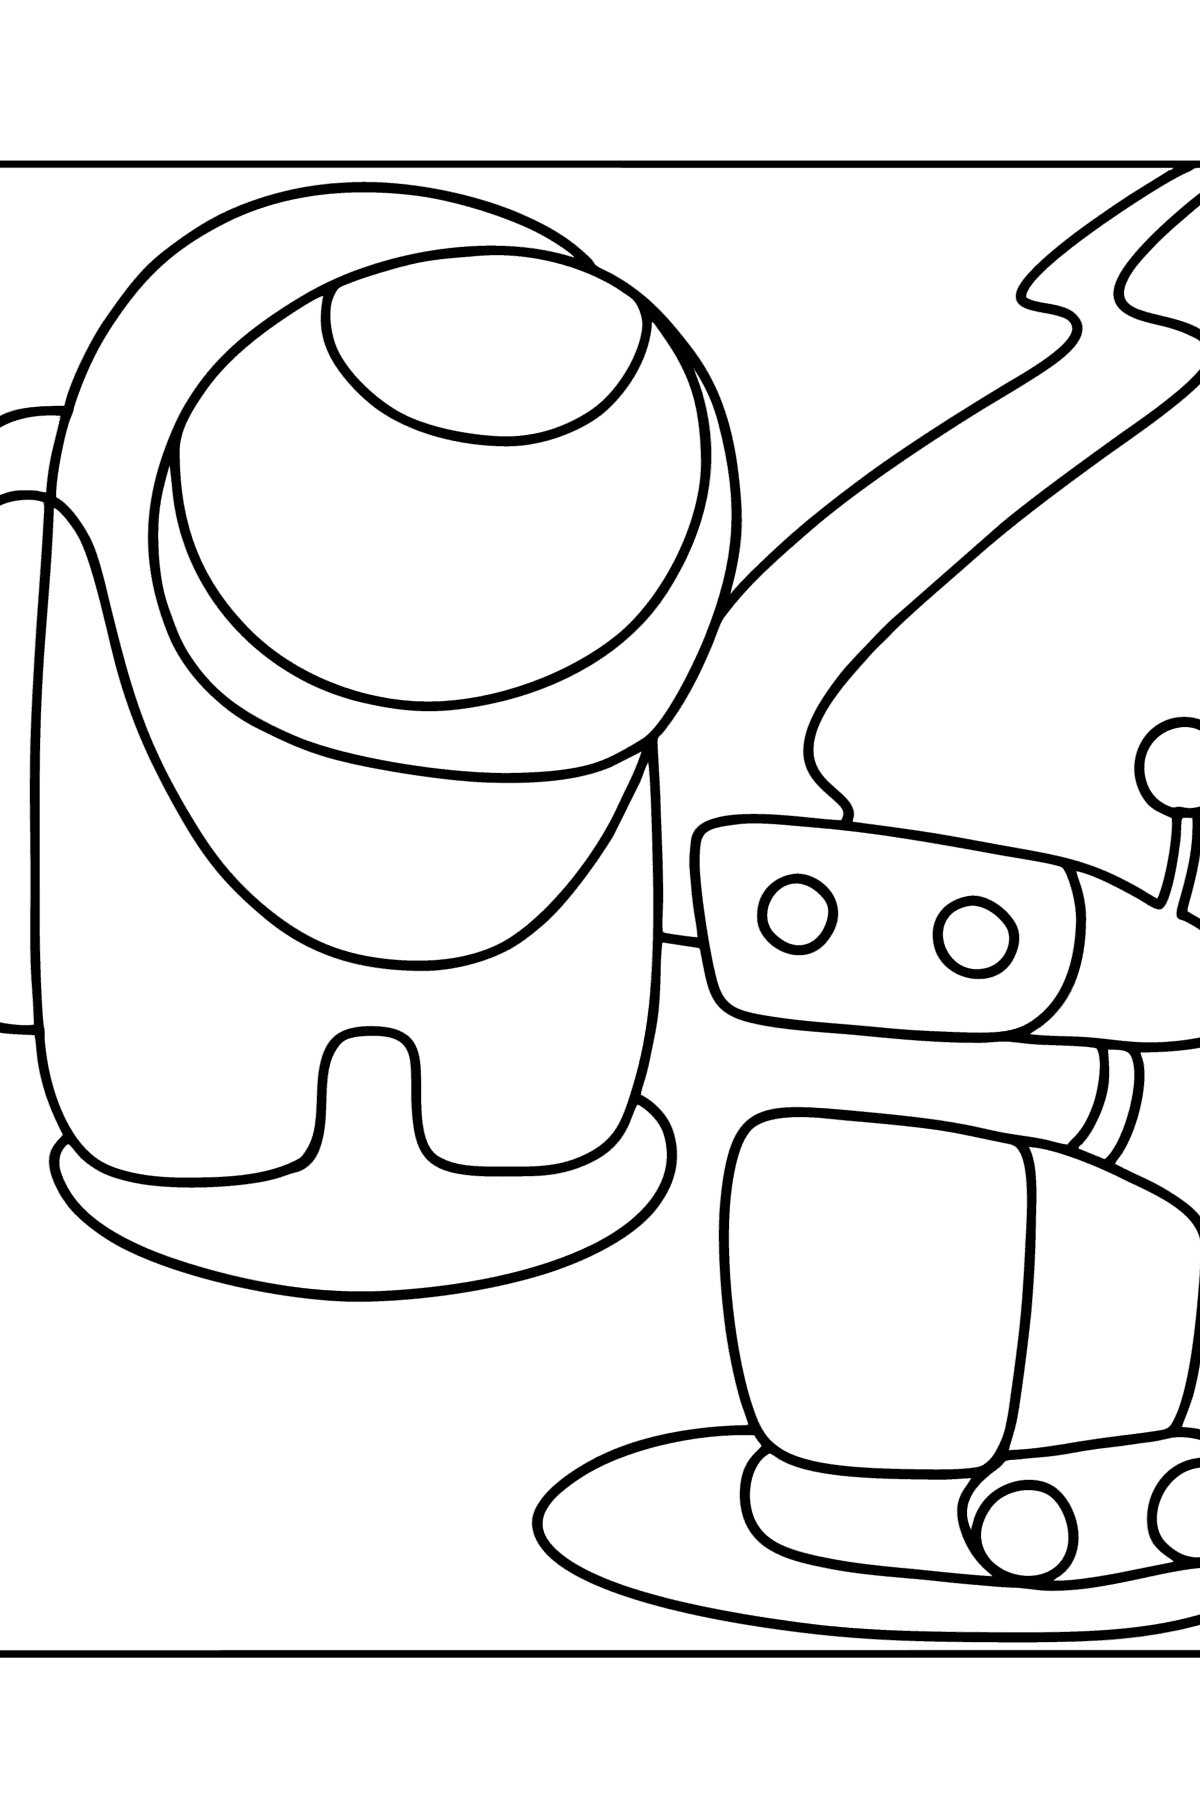 Coloring page astronaut and pet robot Among Us - Coloring Pages for Kids